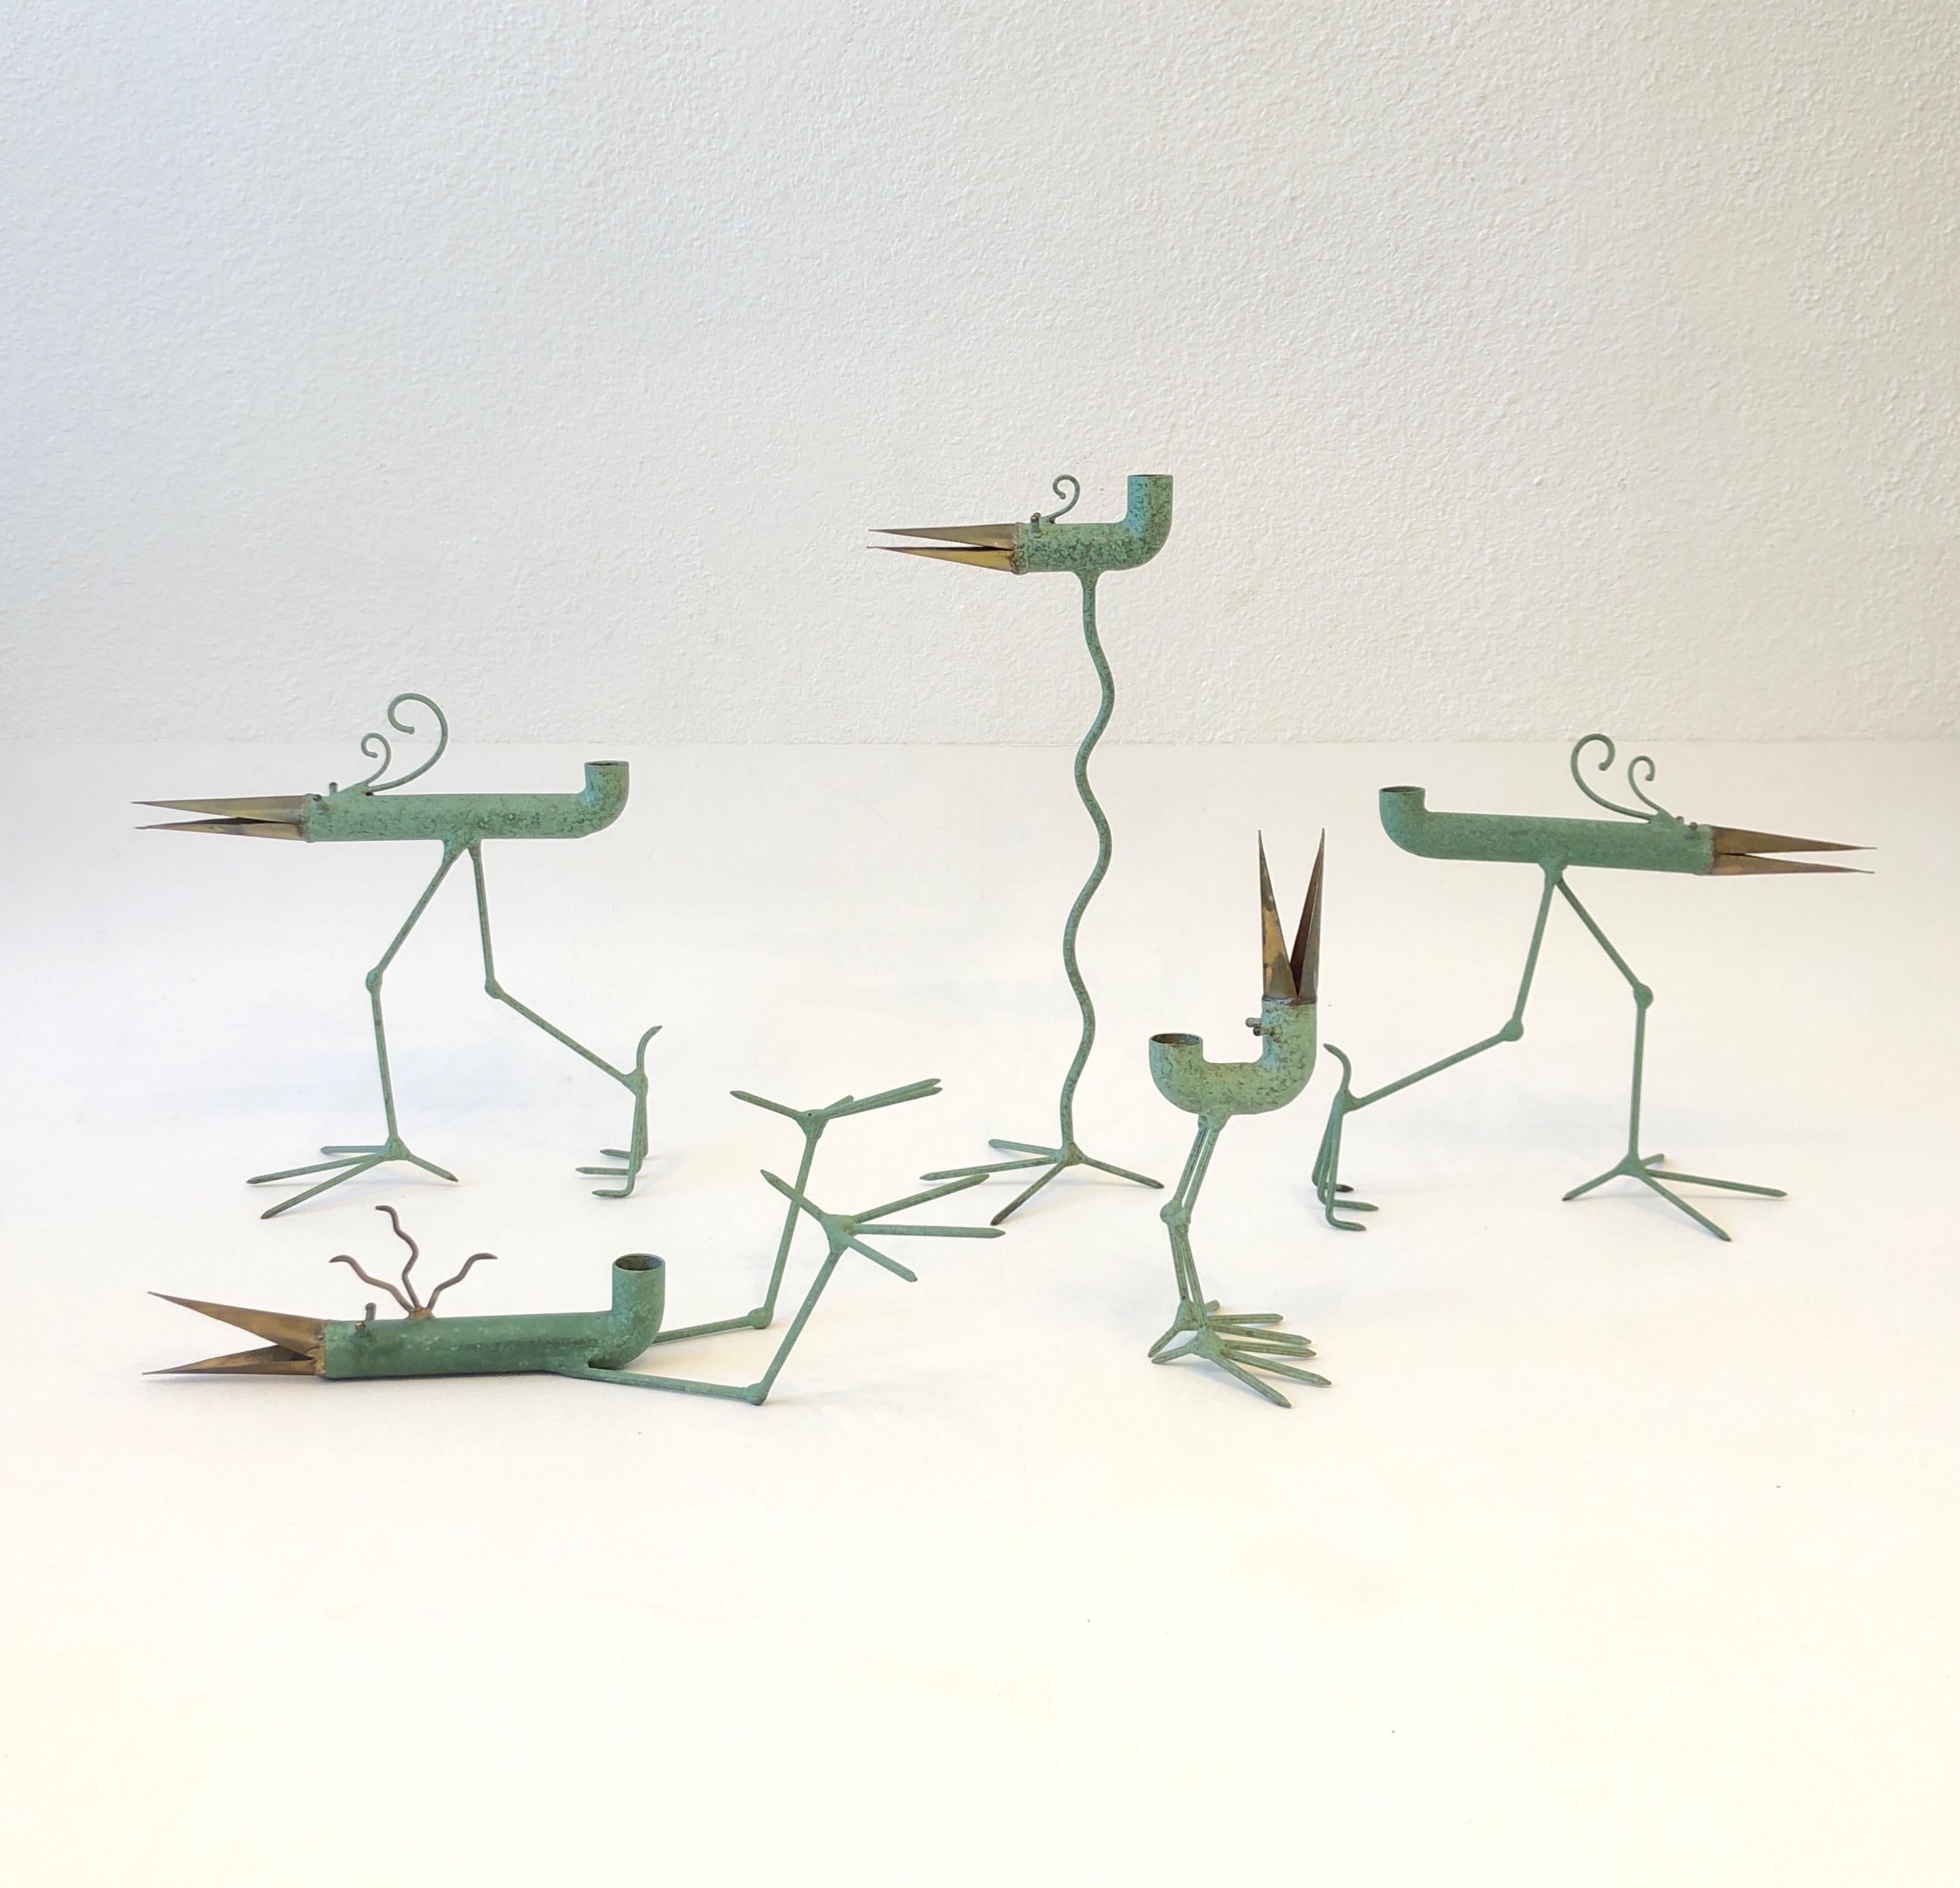 Collection of five whimsical sculptural birds candle holders by architect Gino Bushini.
Constructed of copper, brass and steel with a verdigris patina finish. 
They are all hand signed Bushini. 
Measurements: 
L-14.75” H, 5” D, 6” W.
M-10.5” H,